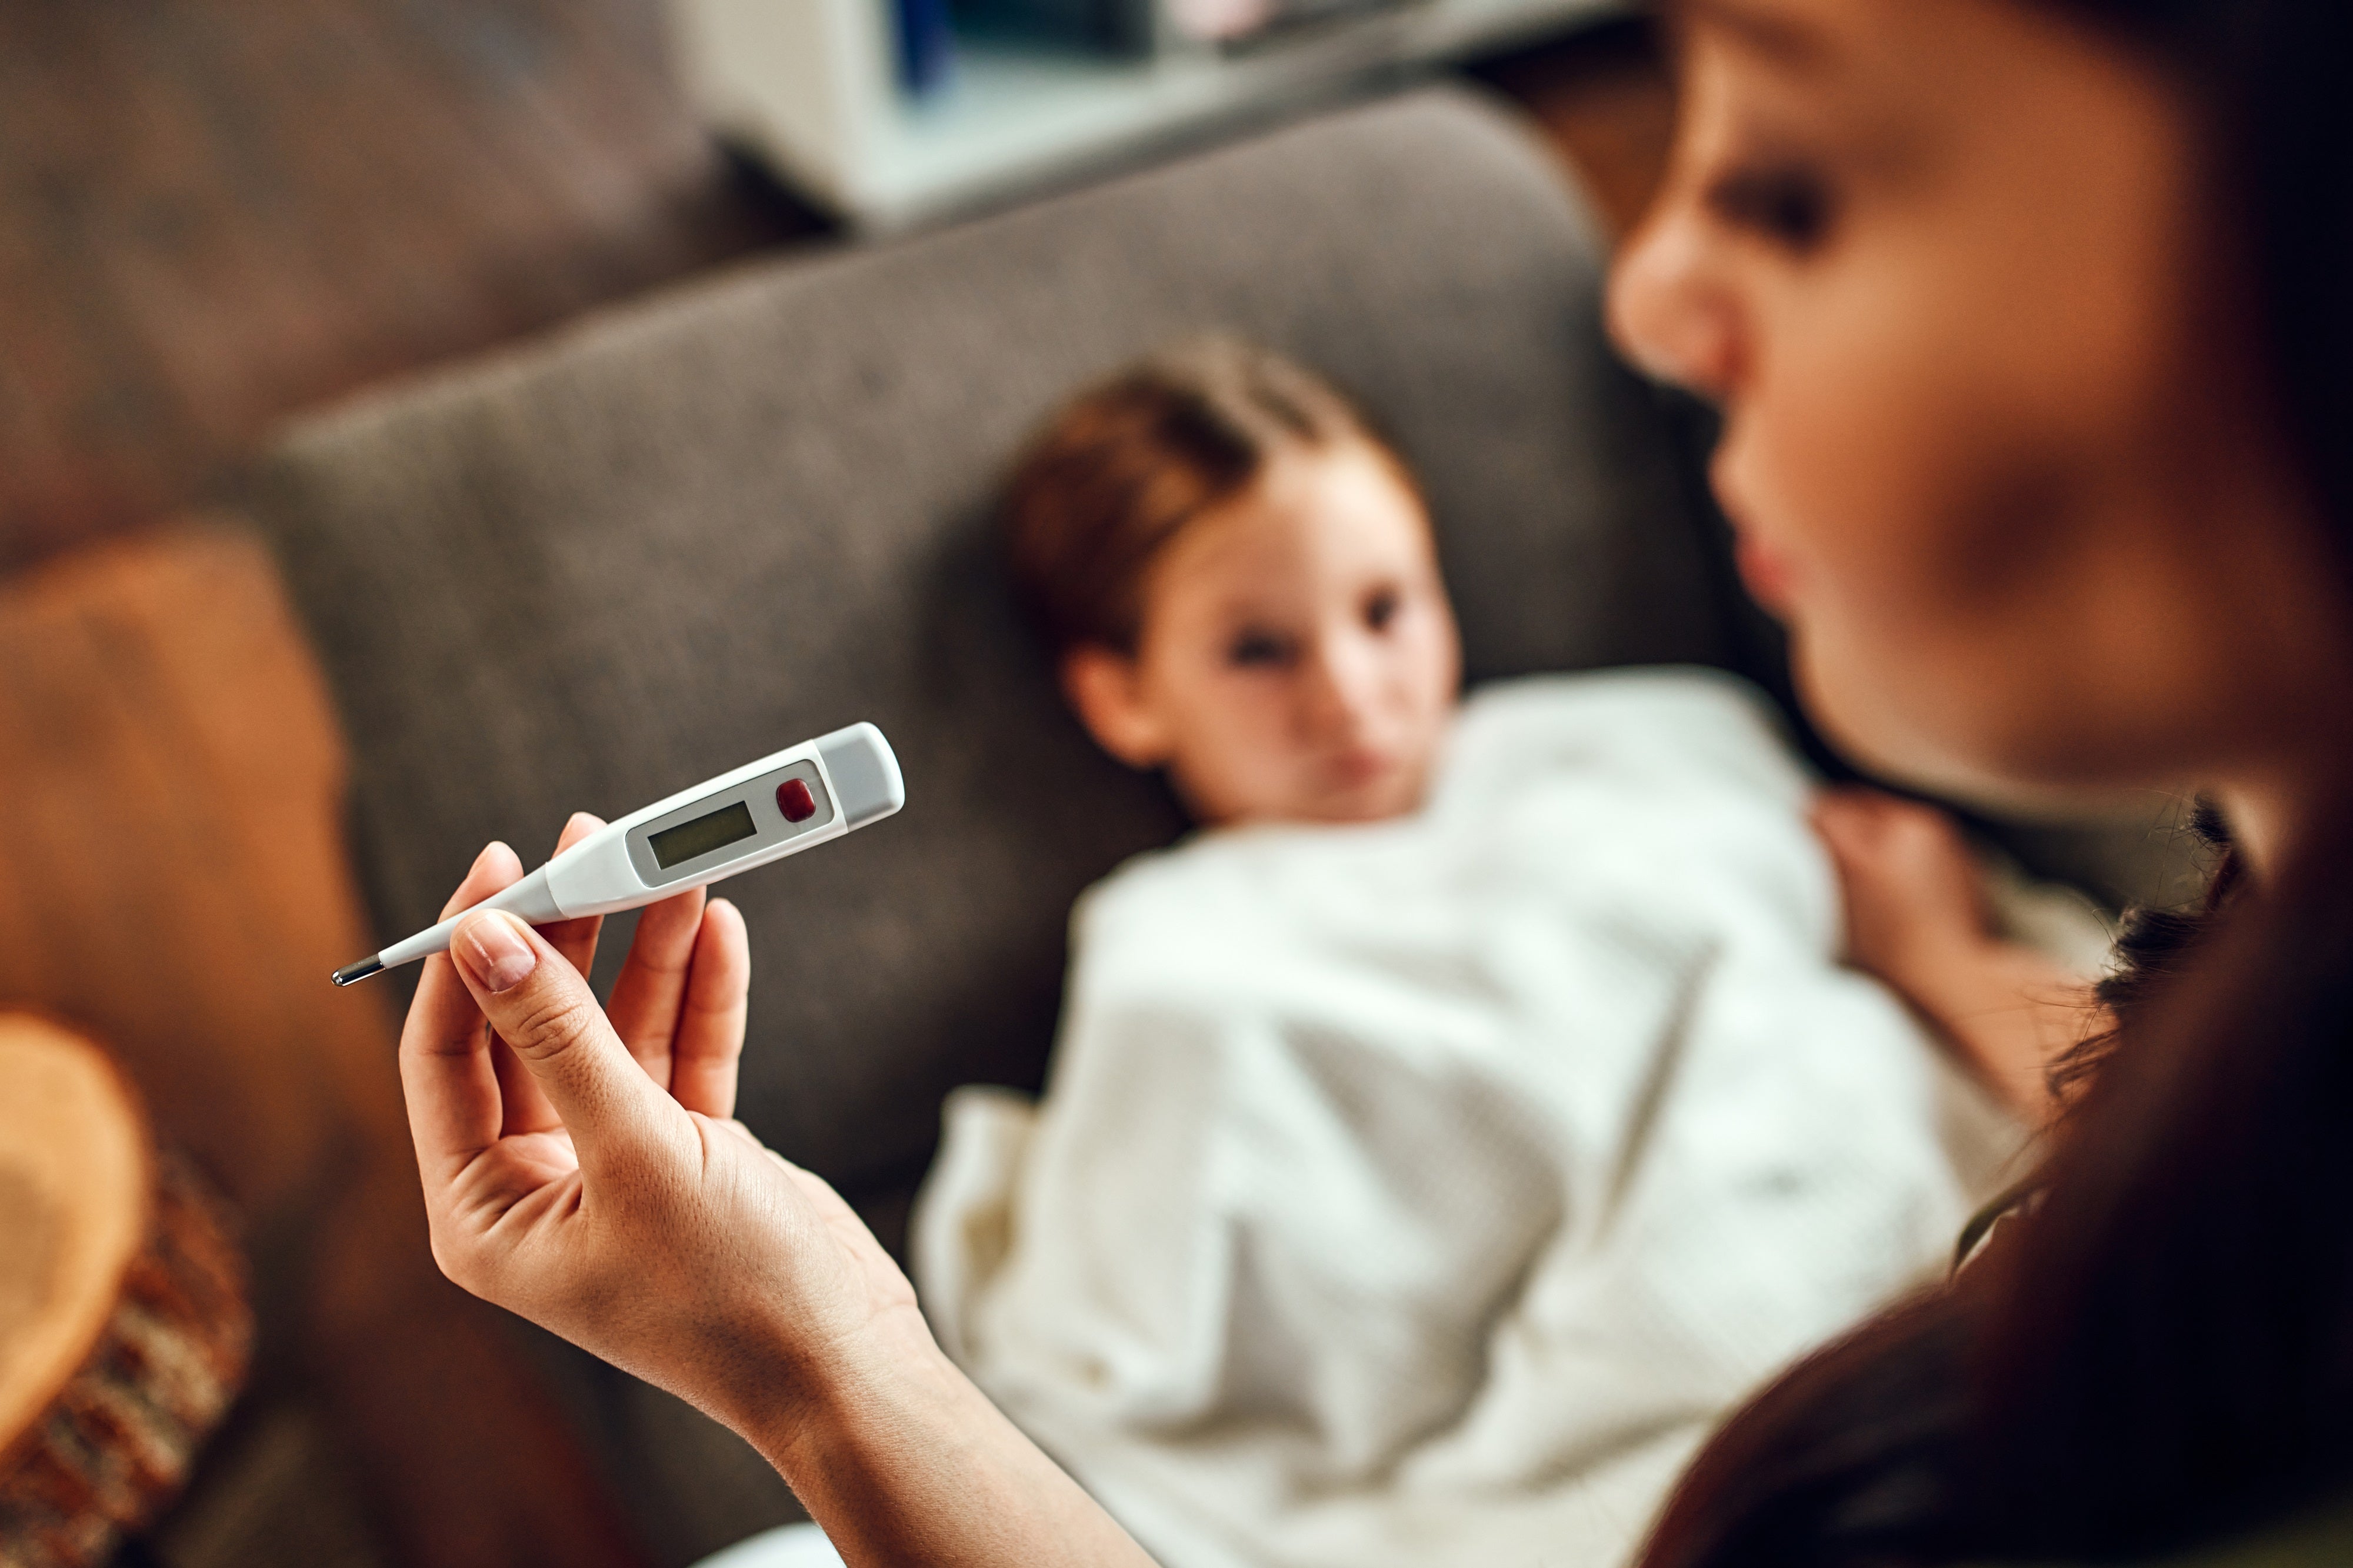 Learn More About Scarlet Fever And How To Protect Your Children - Health  Beat